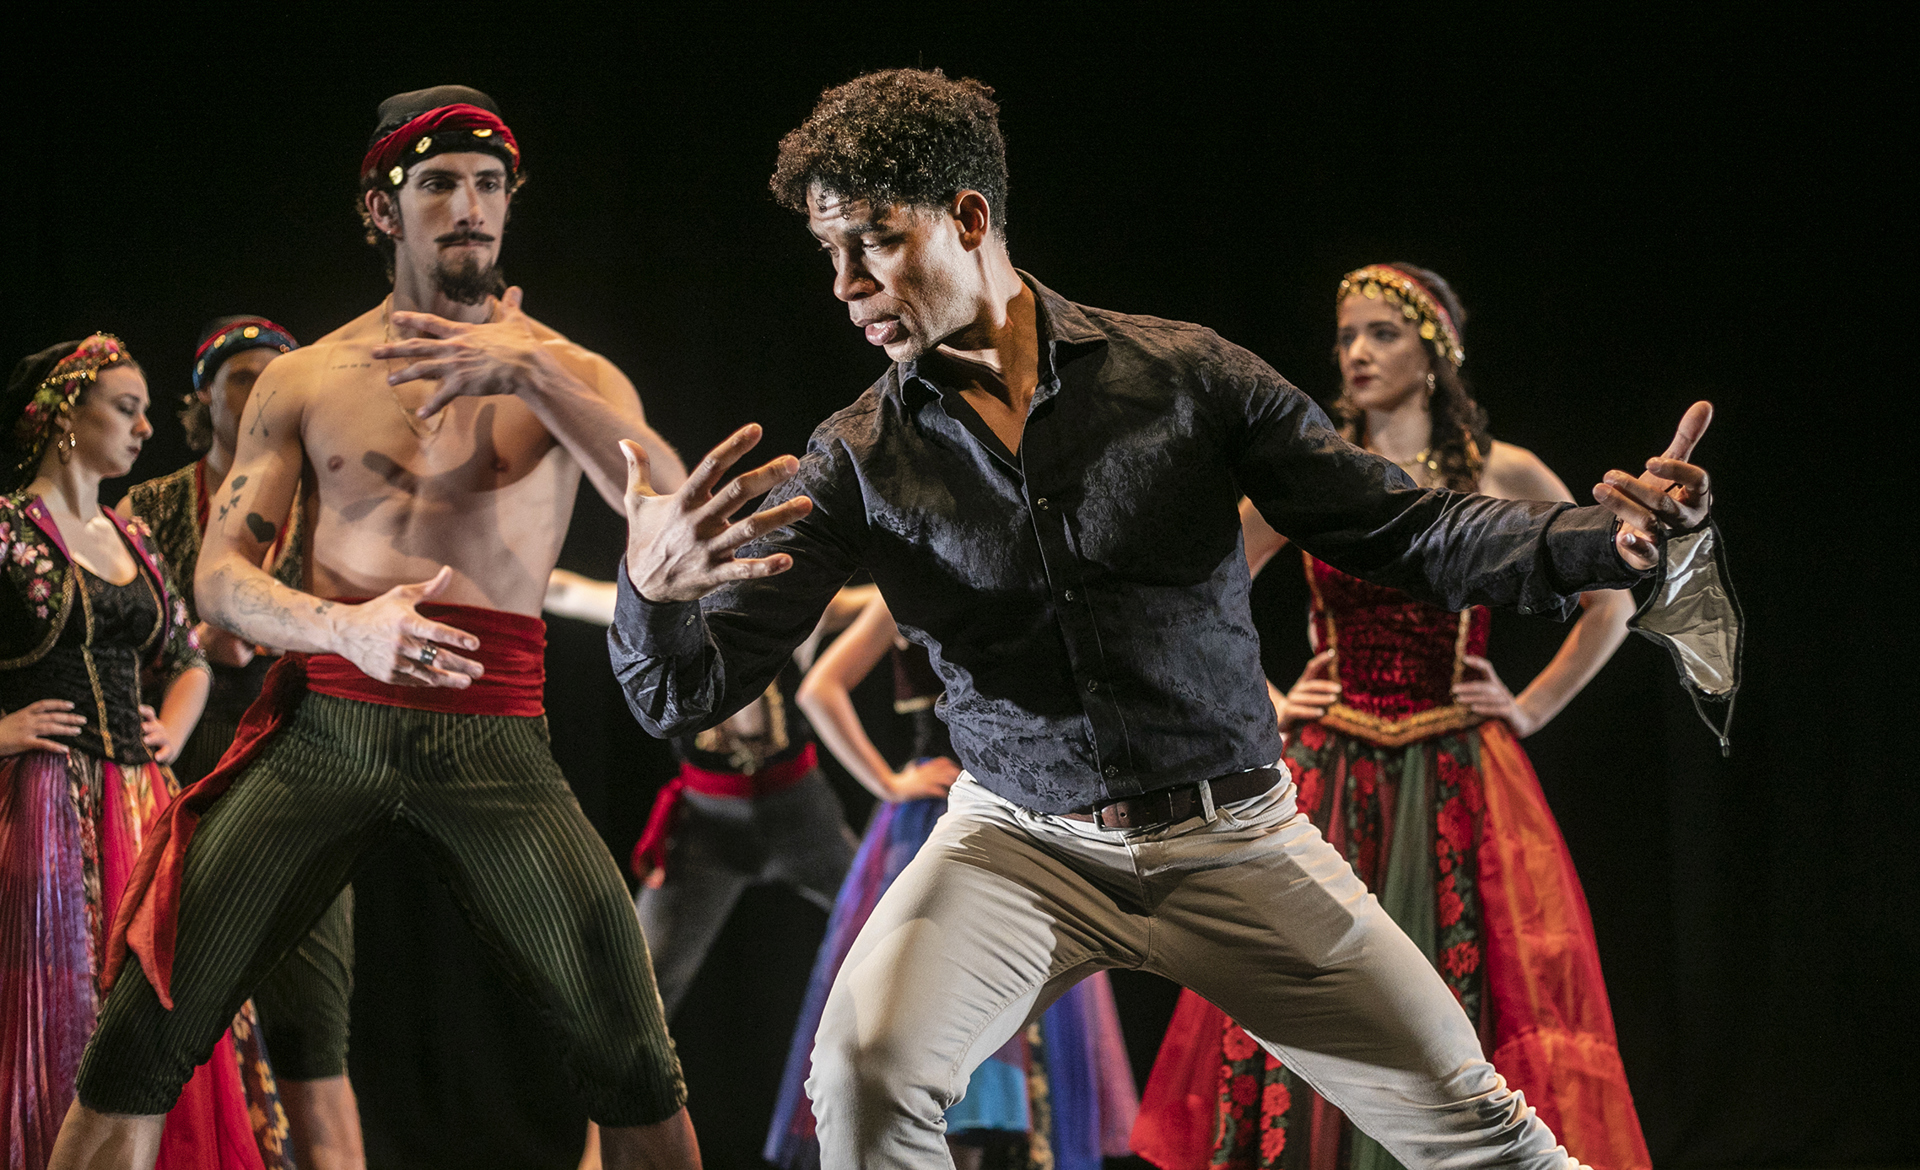 Male cuban dancer Carlos Acosta leaning to the left pretending to hold someone showing male dancer how to perform the move. All in colourful traditional cuban costumes